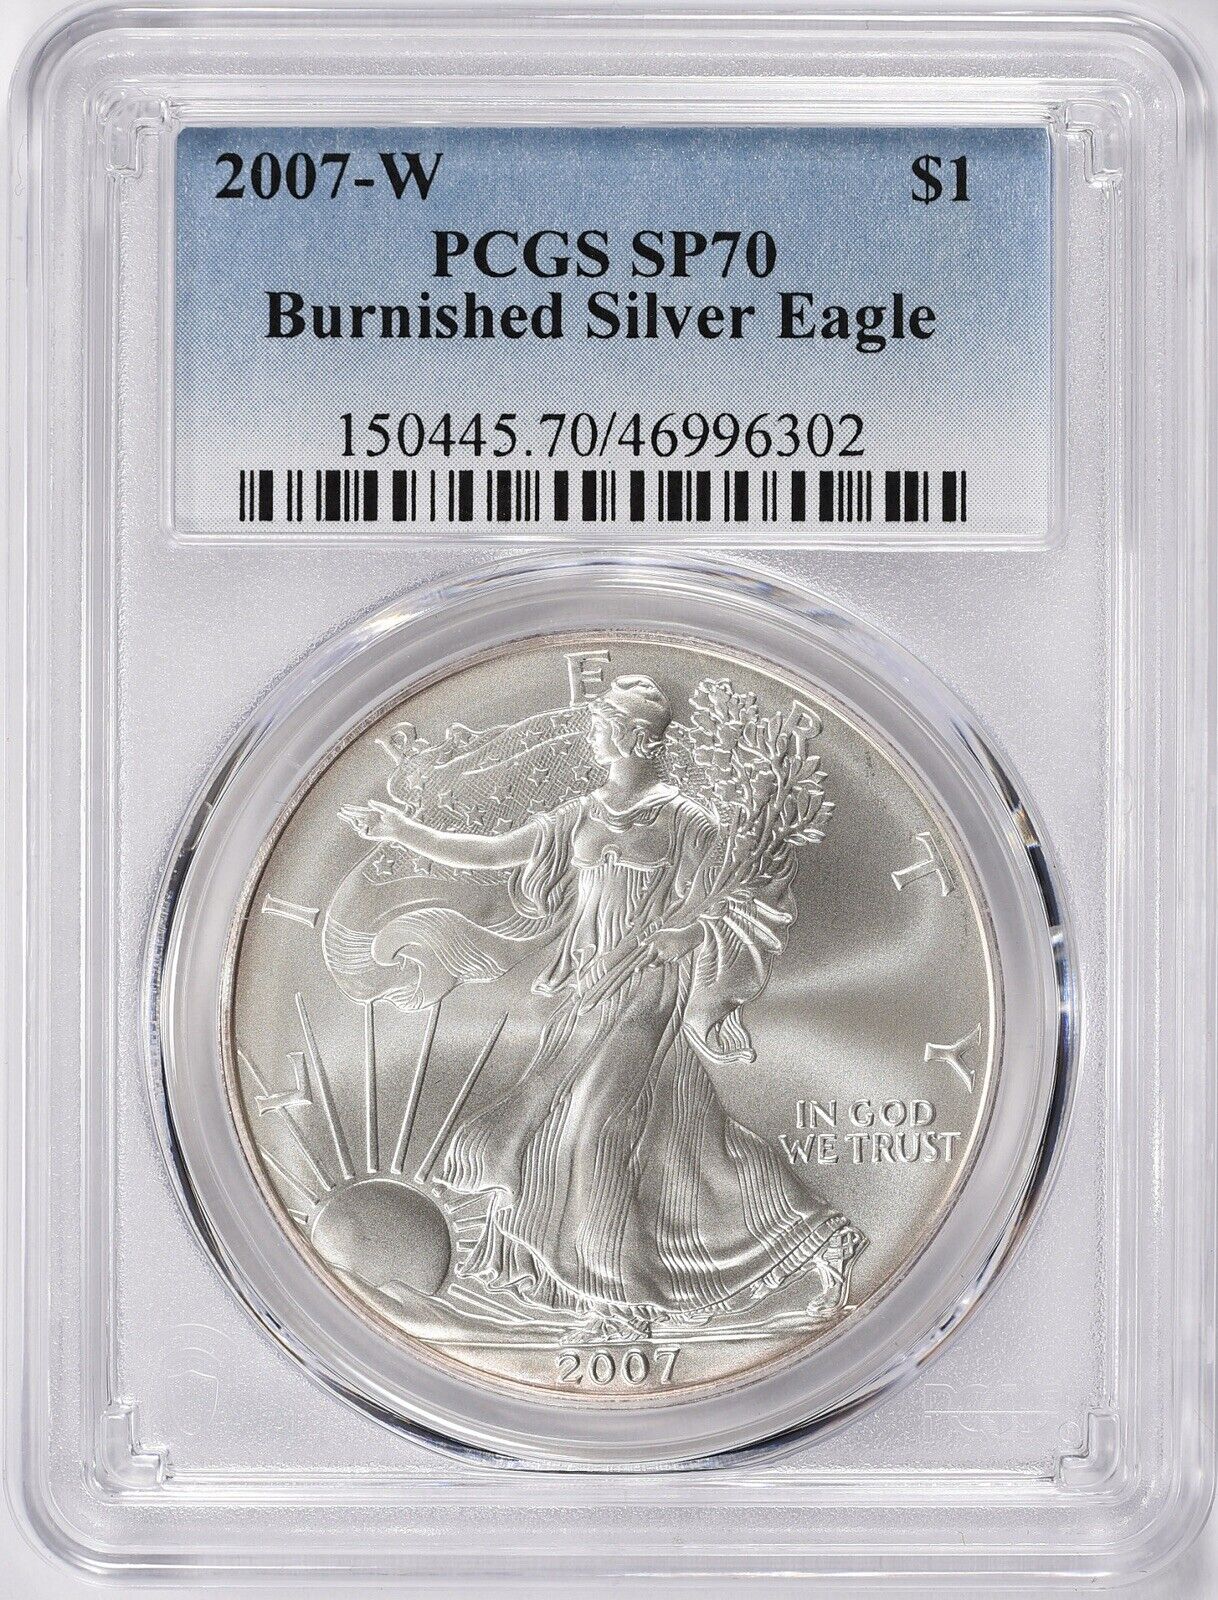 2007 W Burnished Silver Eagle PCGS SP70 